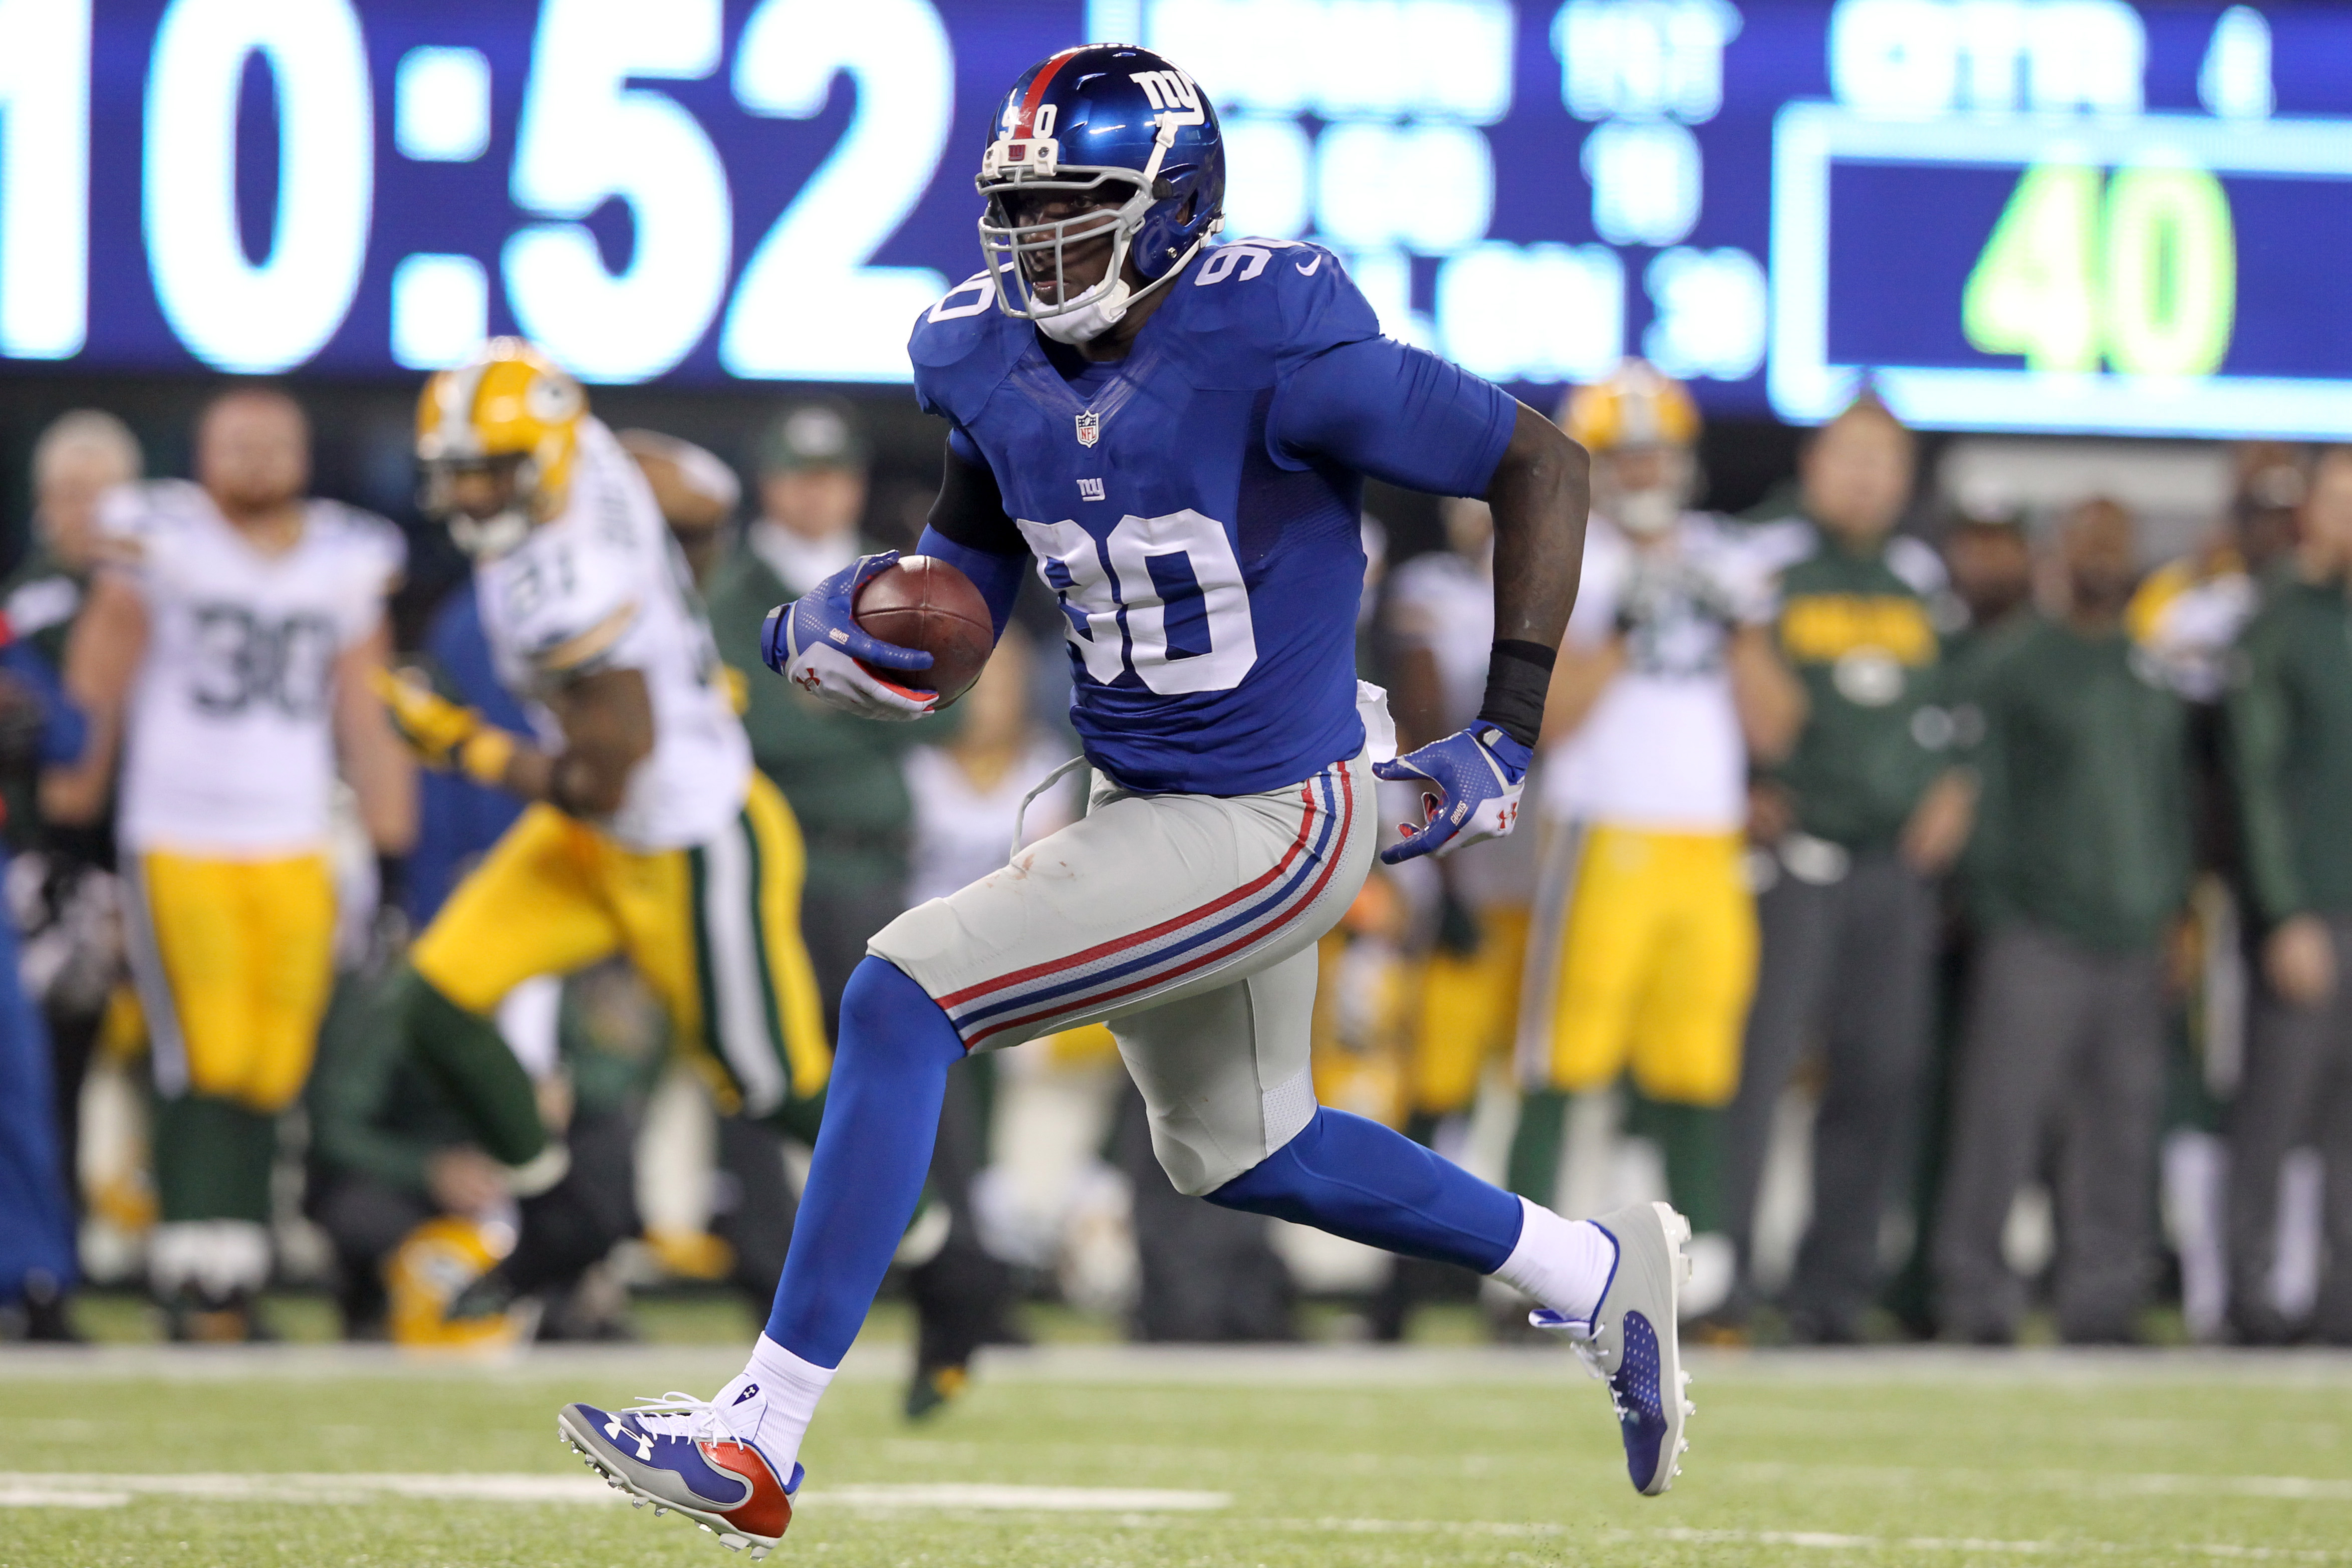 NFL: Green Bay Packers at New York Giants